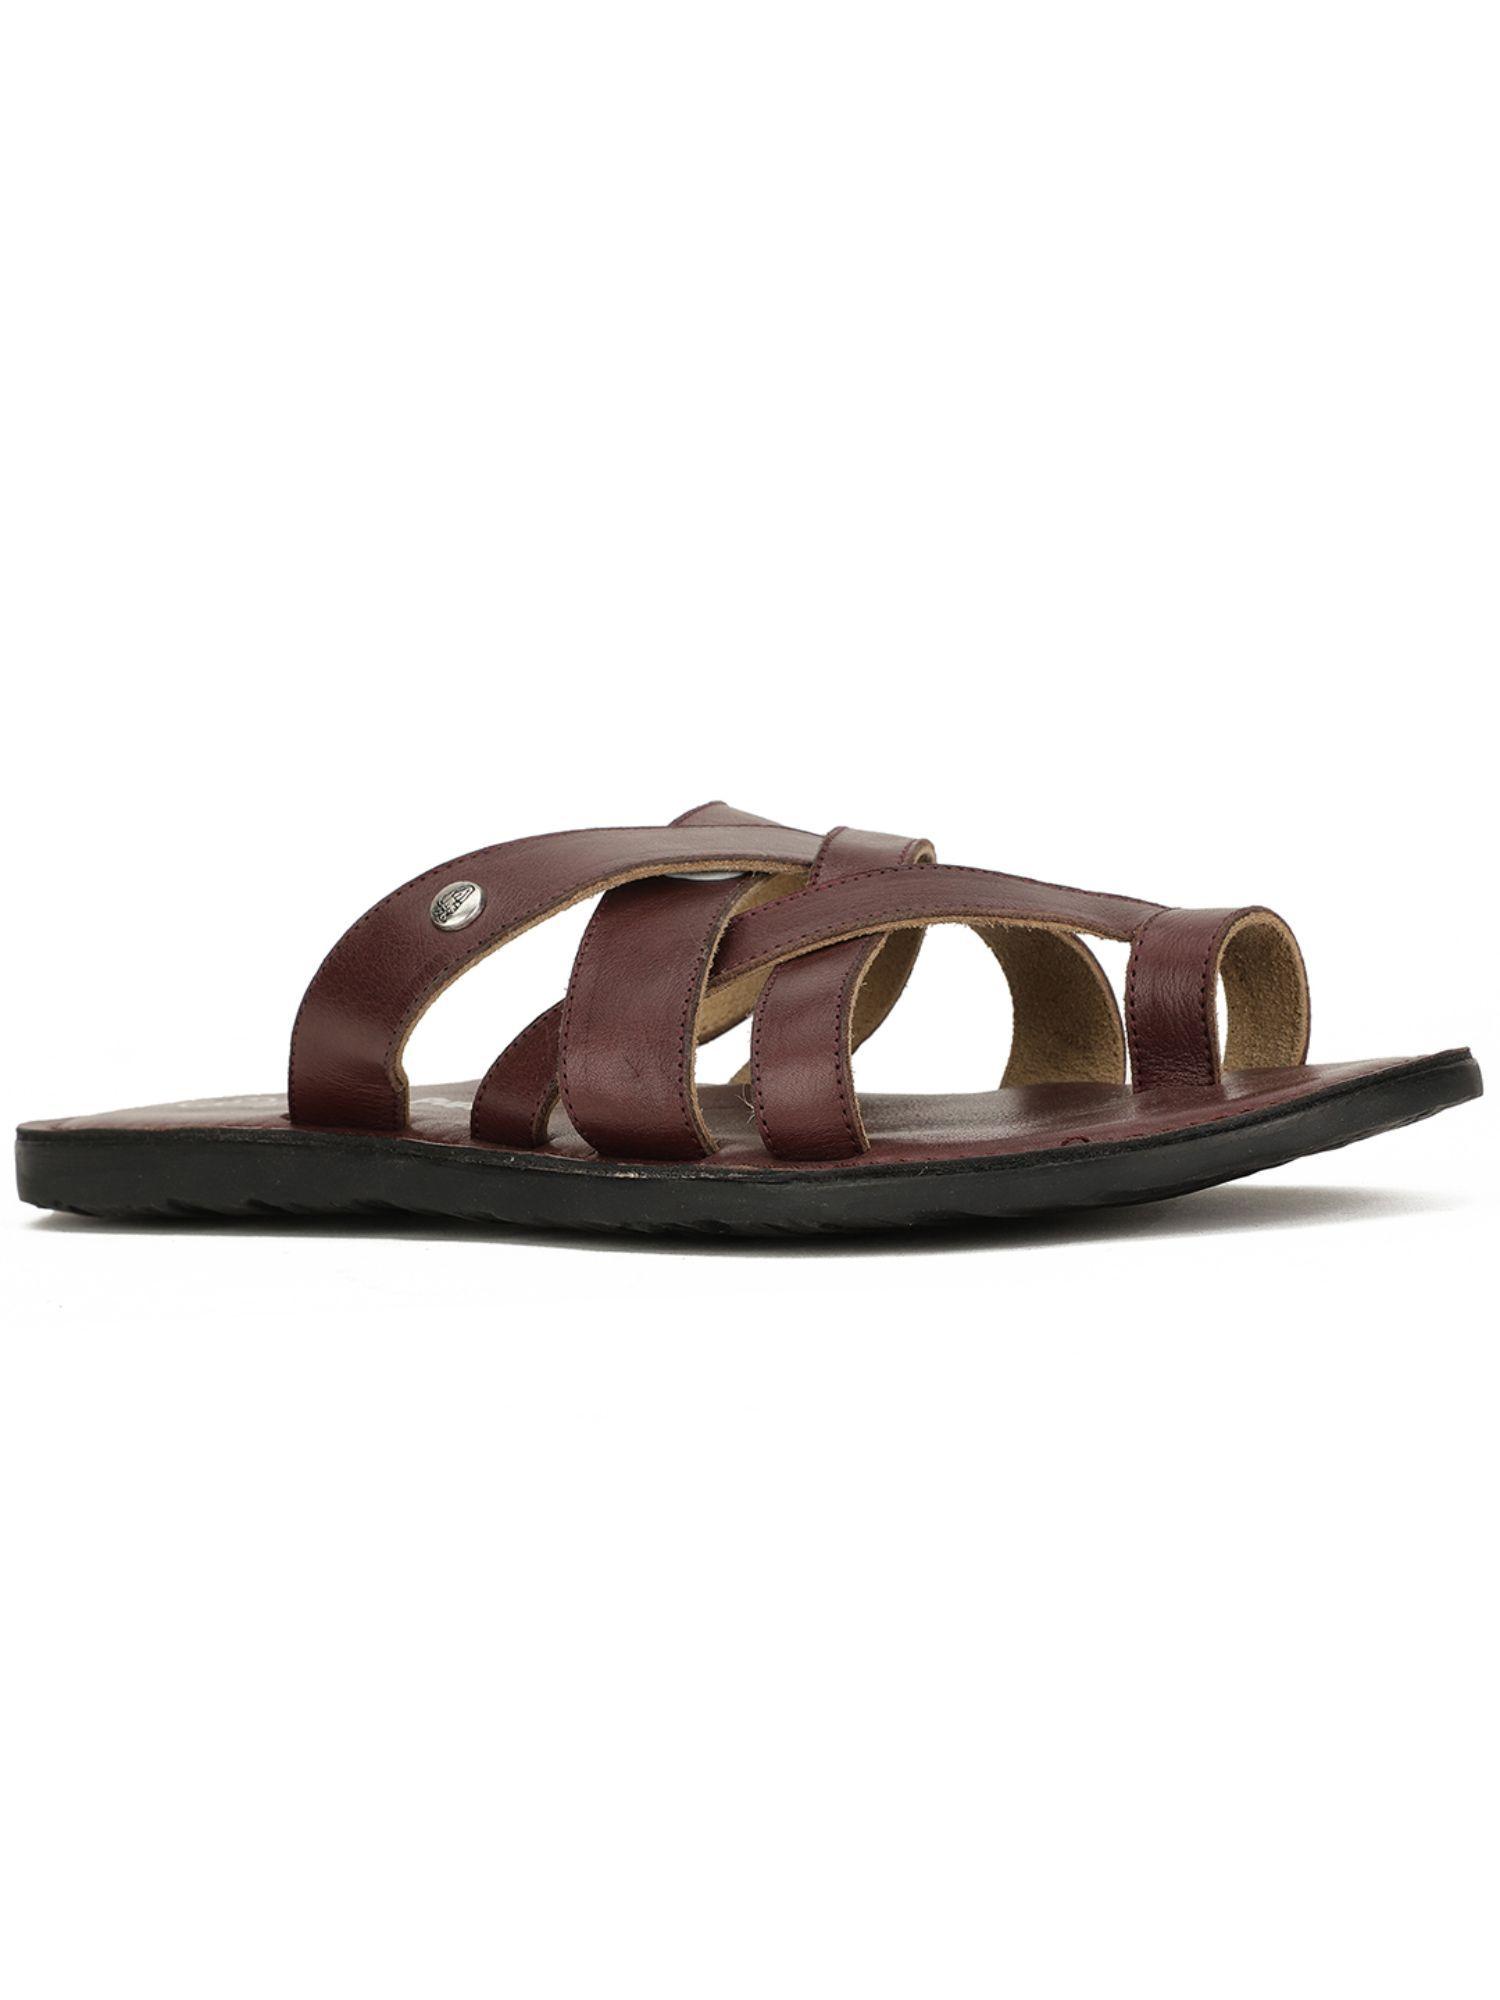 mens-brown-slip-on-casual-sandals